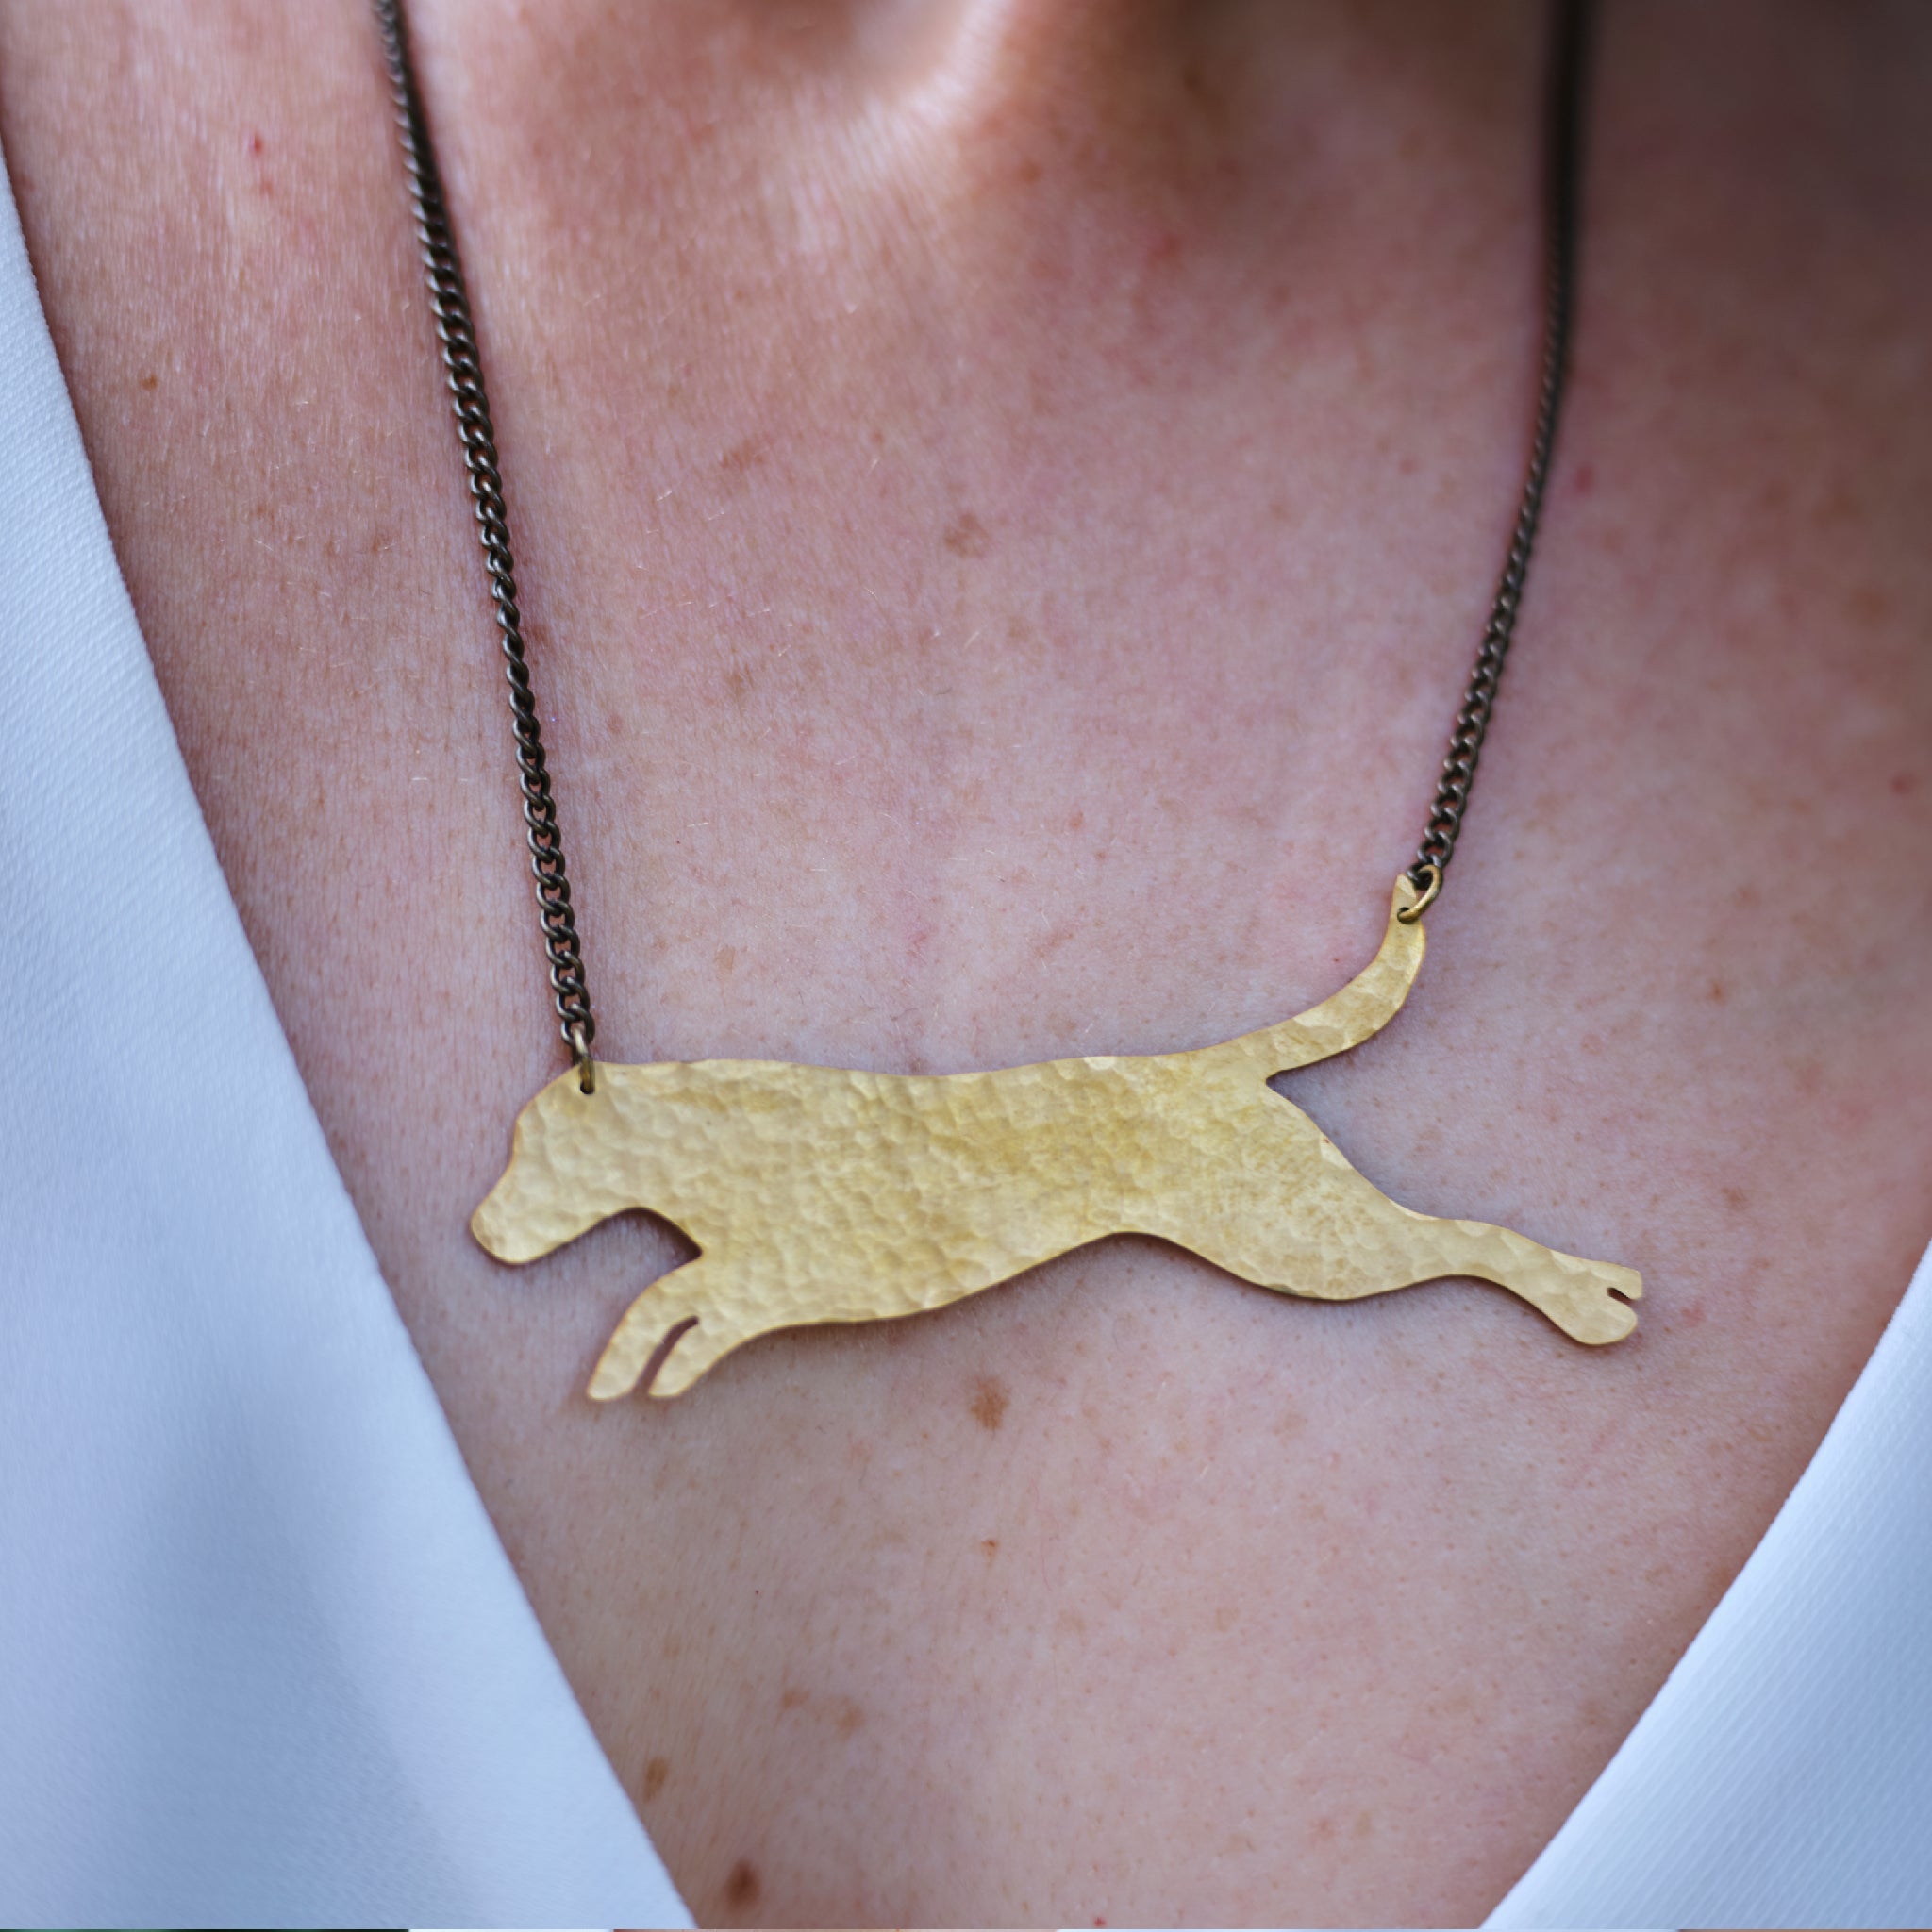 A close up of the leaping dog brass necklace being worn by a lady in a white top.